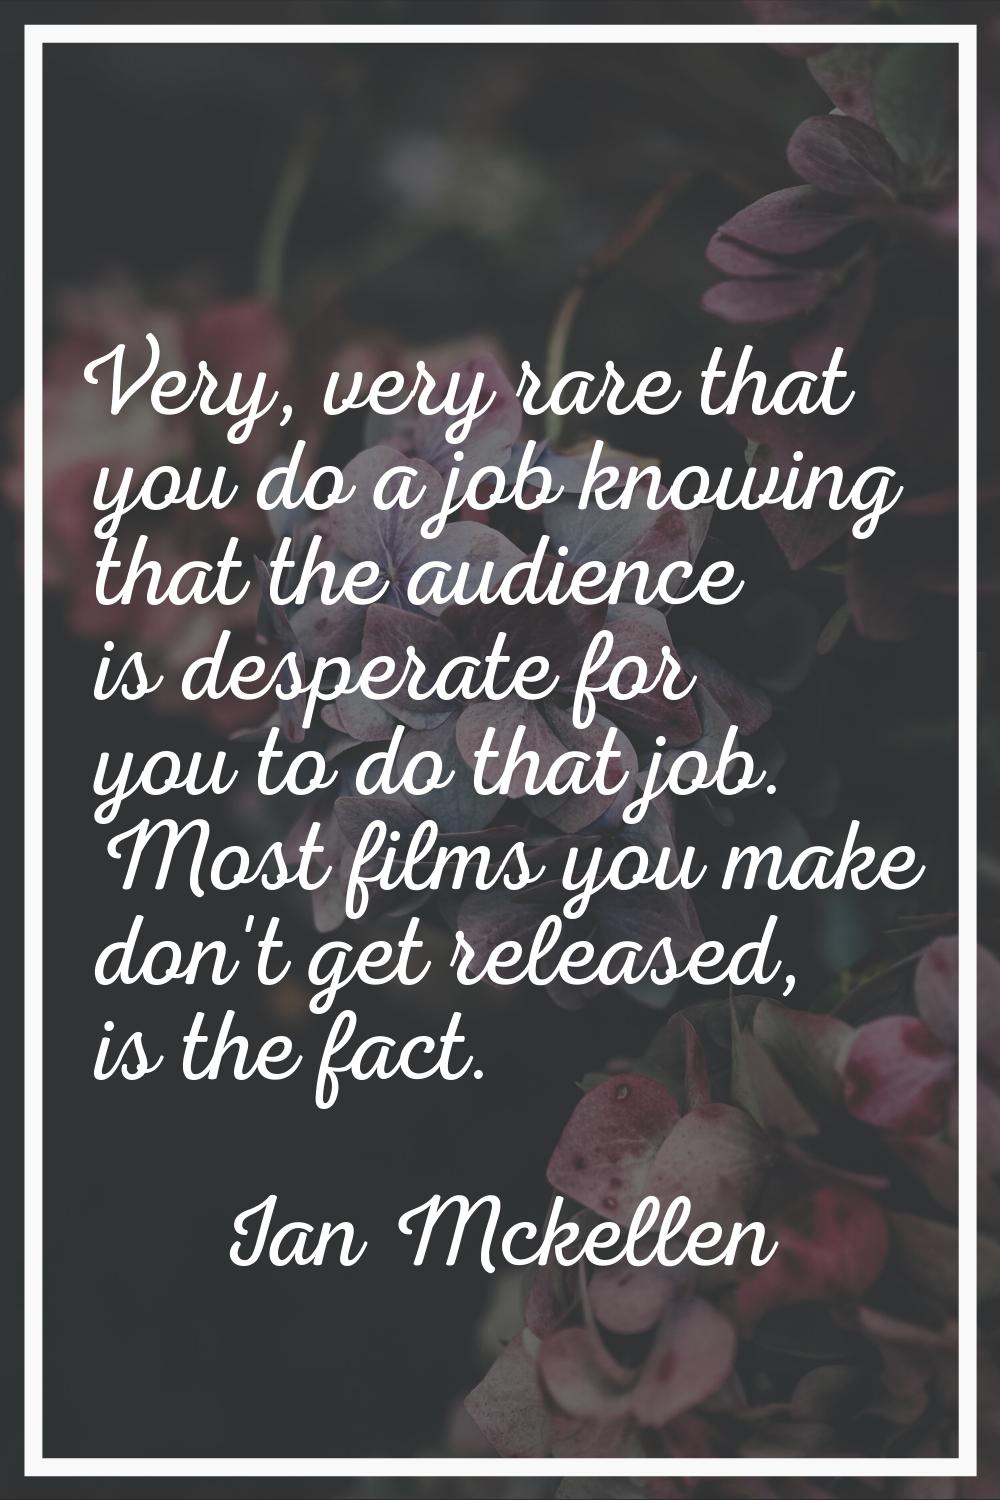 Very, very rare that you do a job knowing that the audience is desperate for you to do that job. Mo